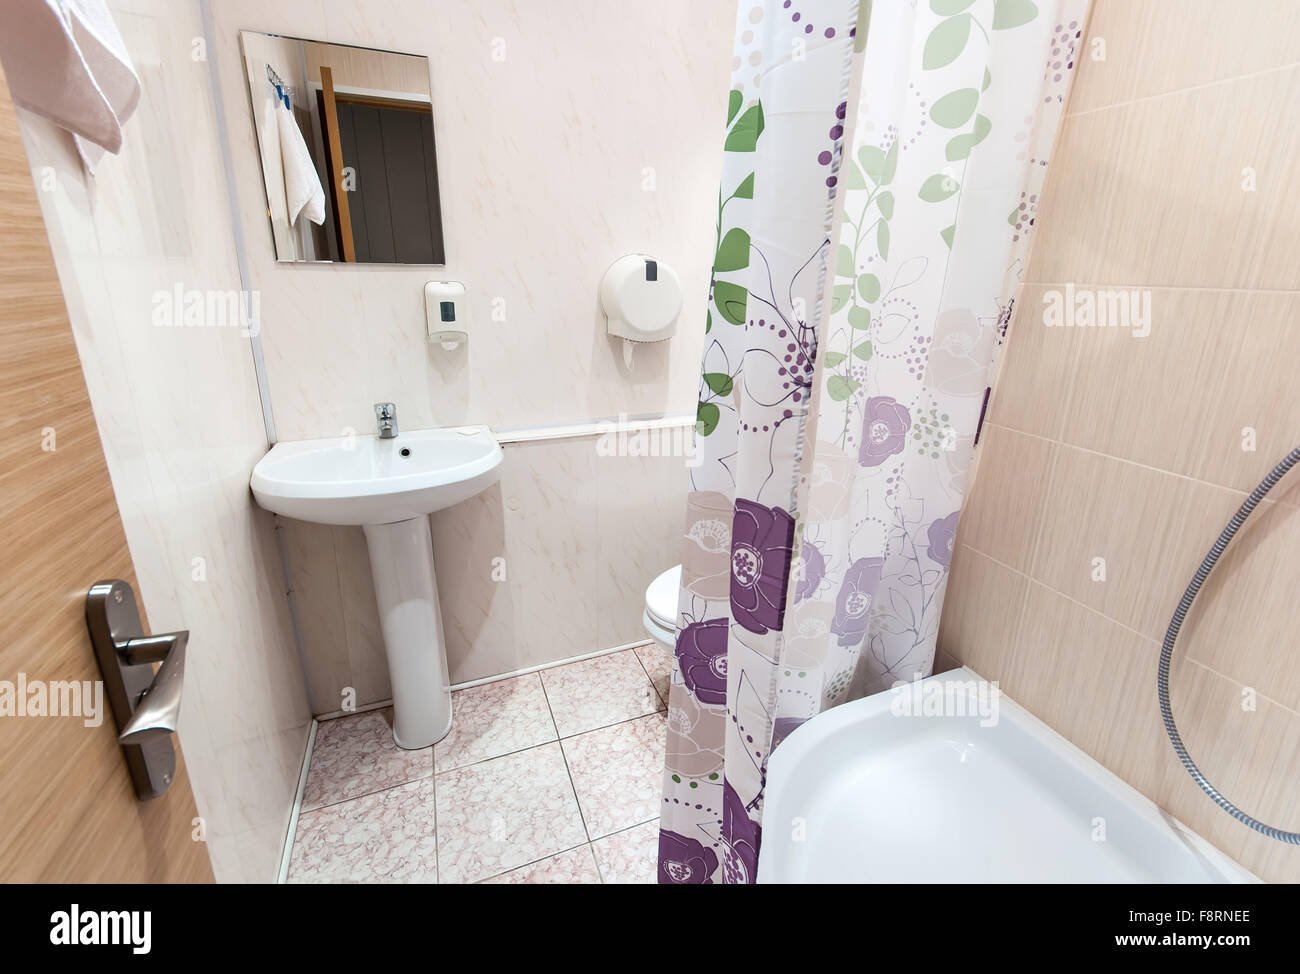 combined bathroom with sink toilet and shower tray Stock Photo